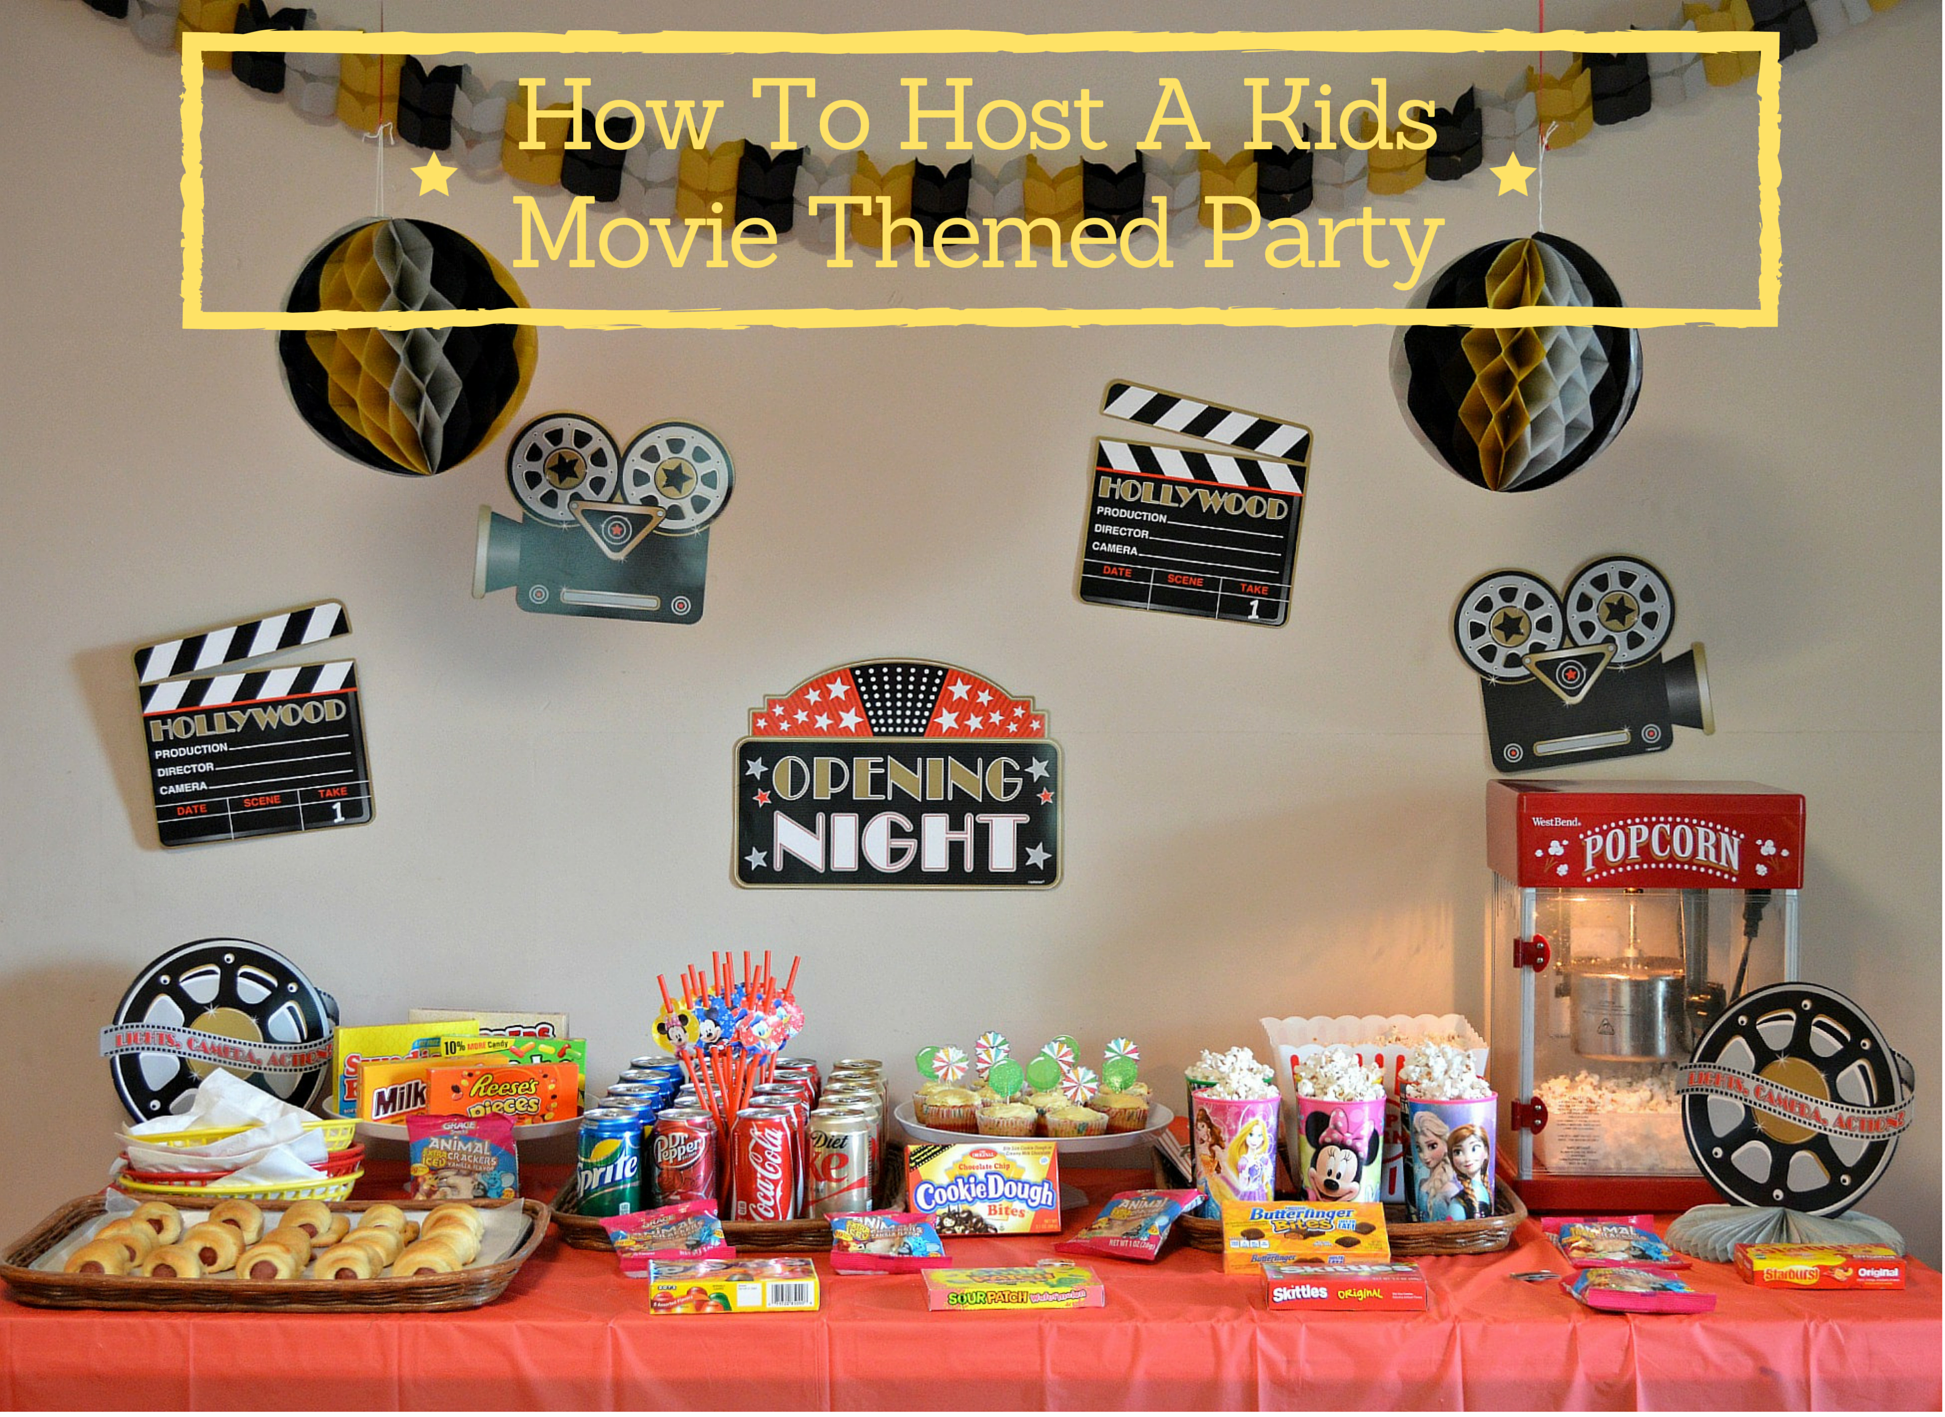 How To Host A Kids Movie Themed Party